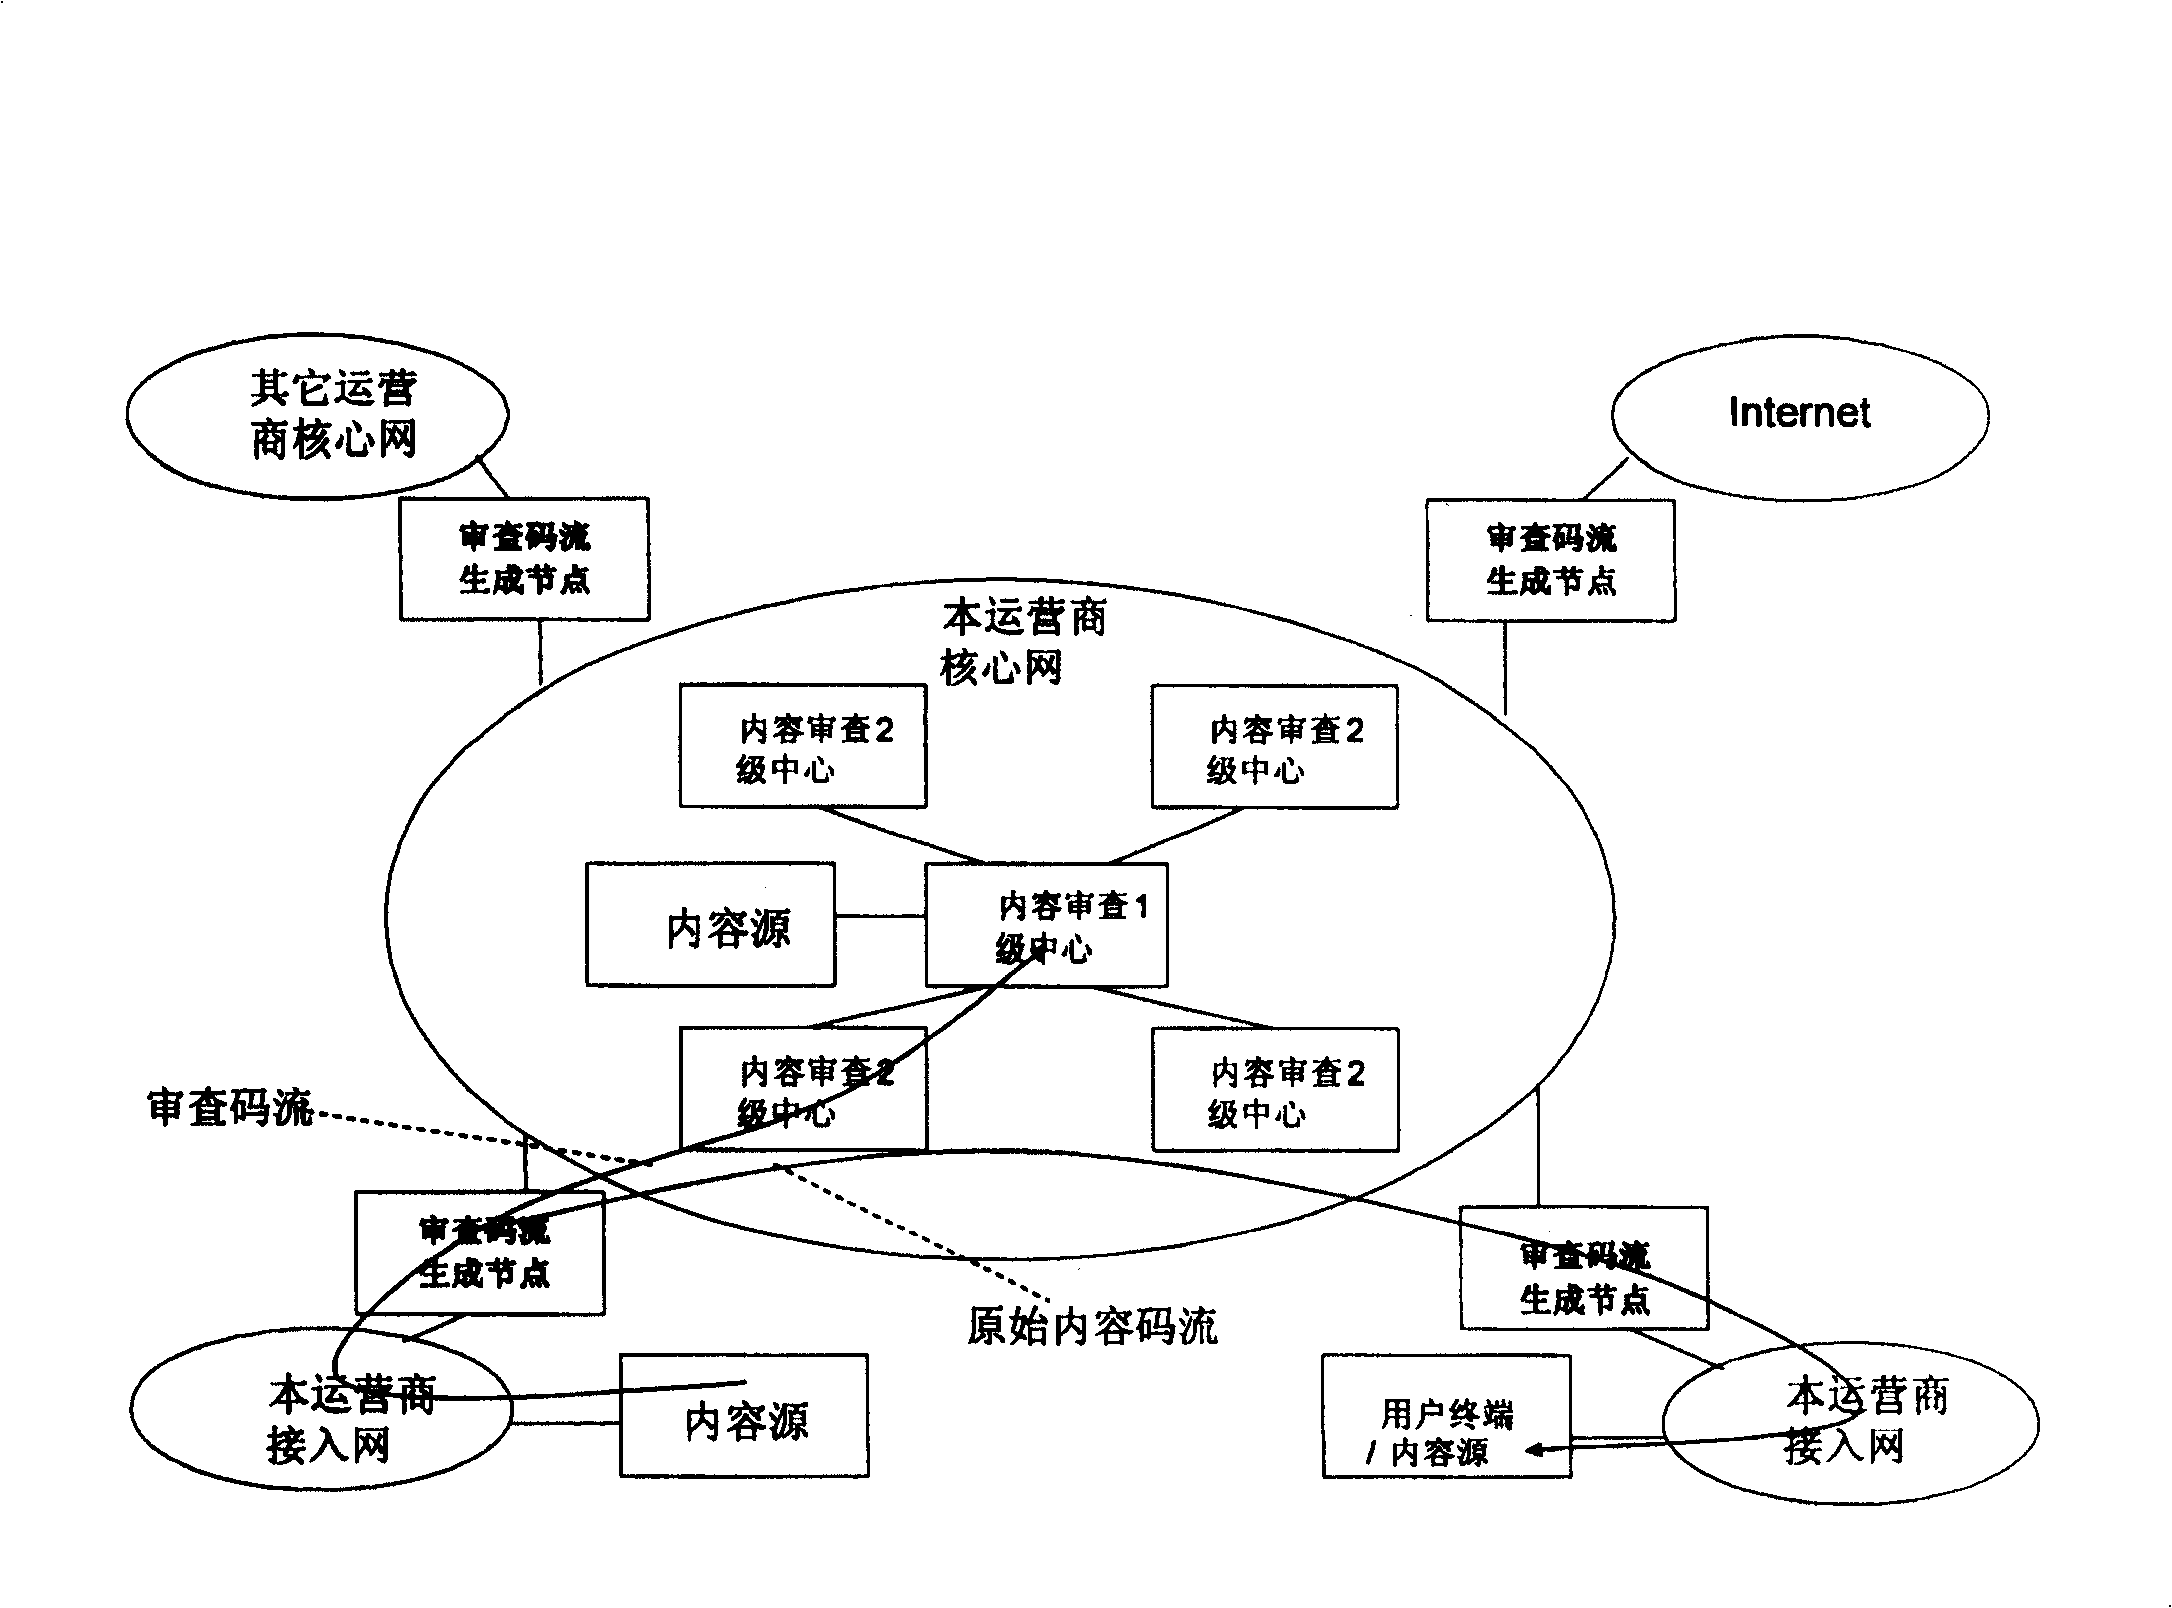 User terminal equipment for stream media content checking and checking method